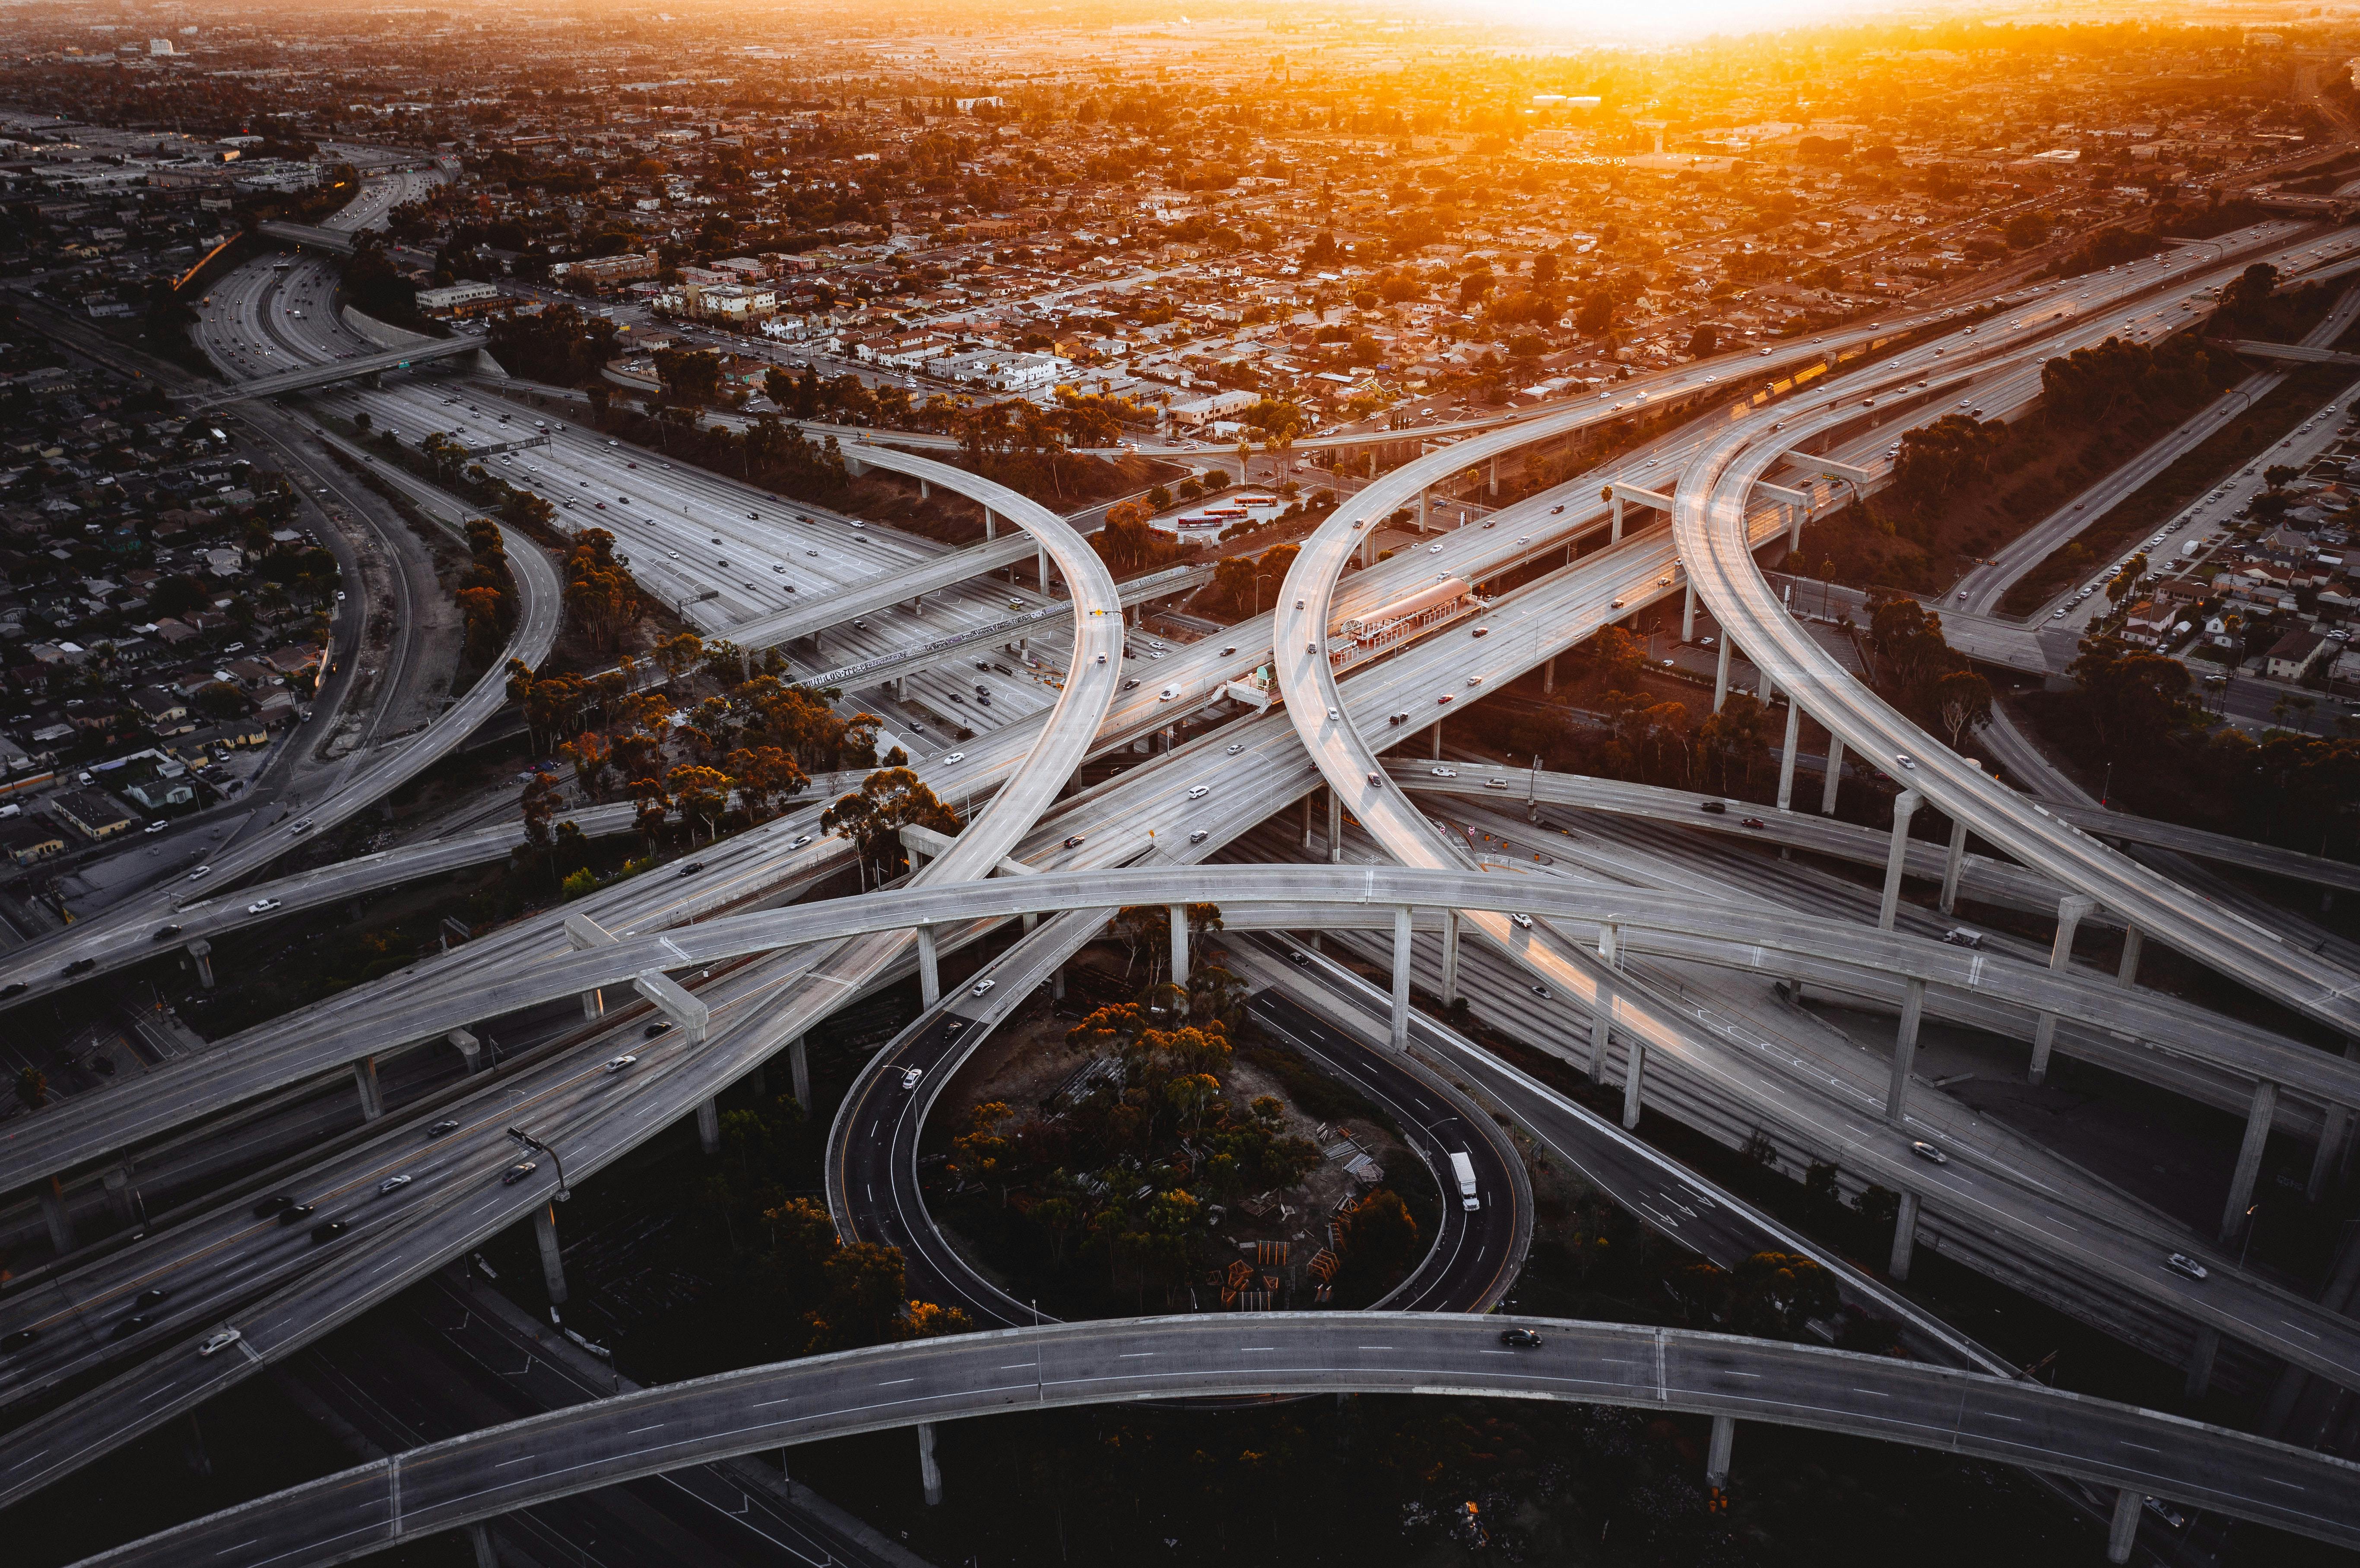 Aerial shot of complex highway spaghetti intersection